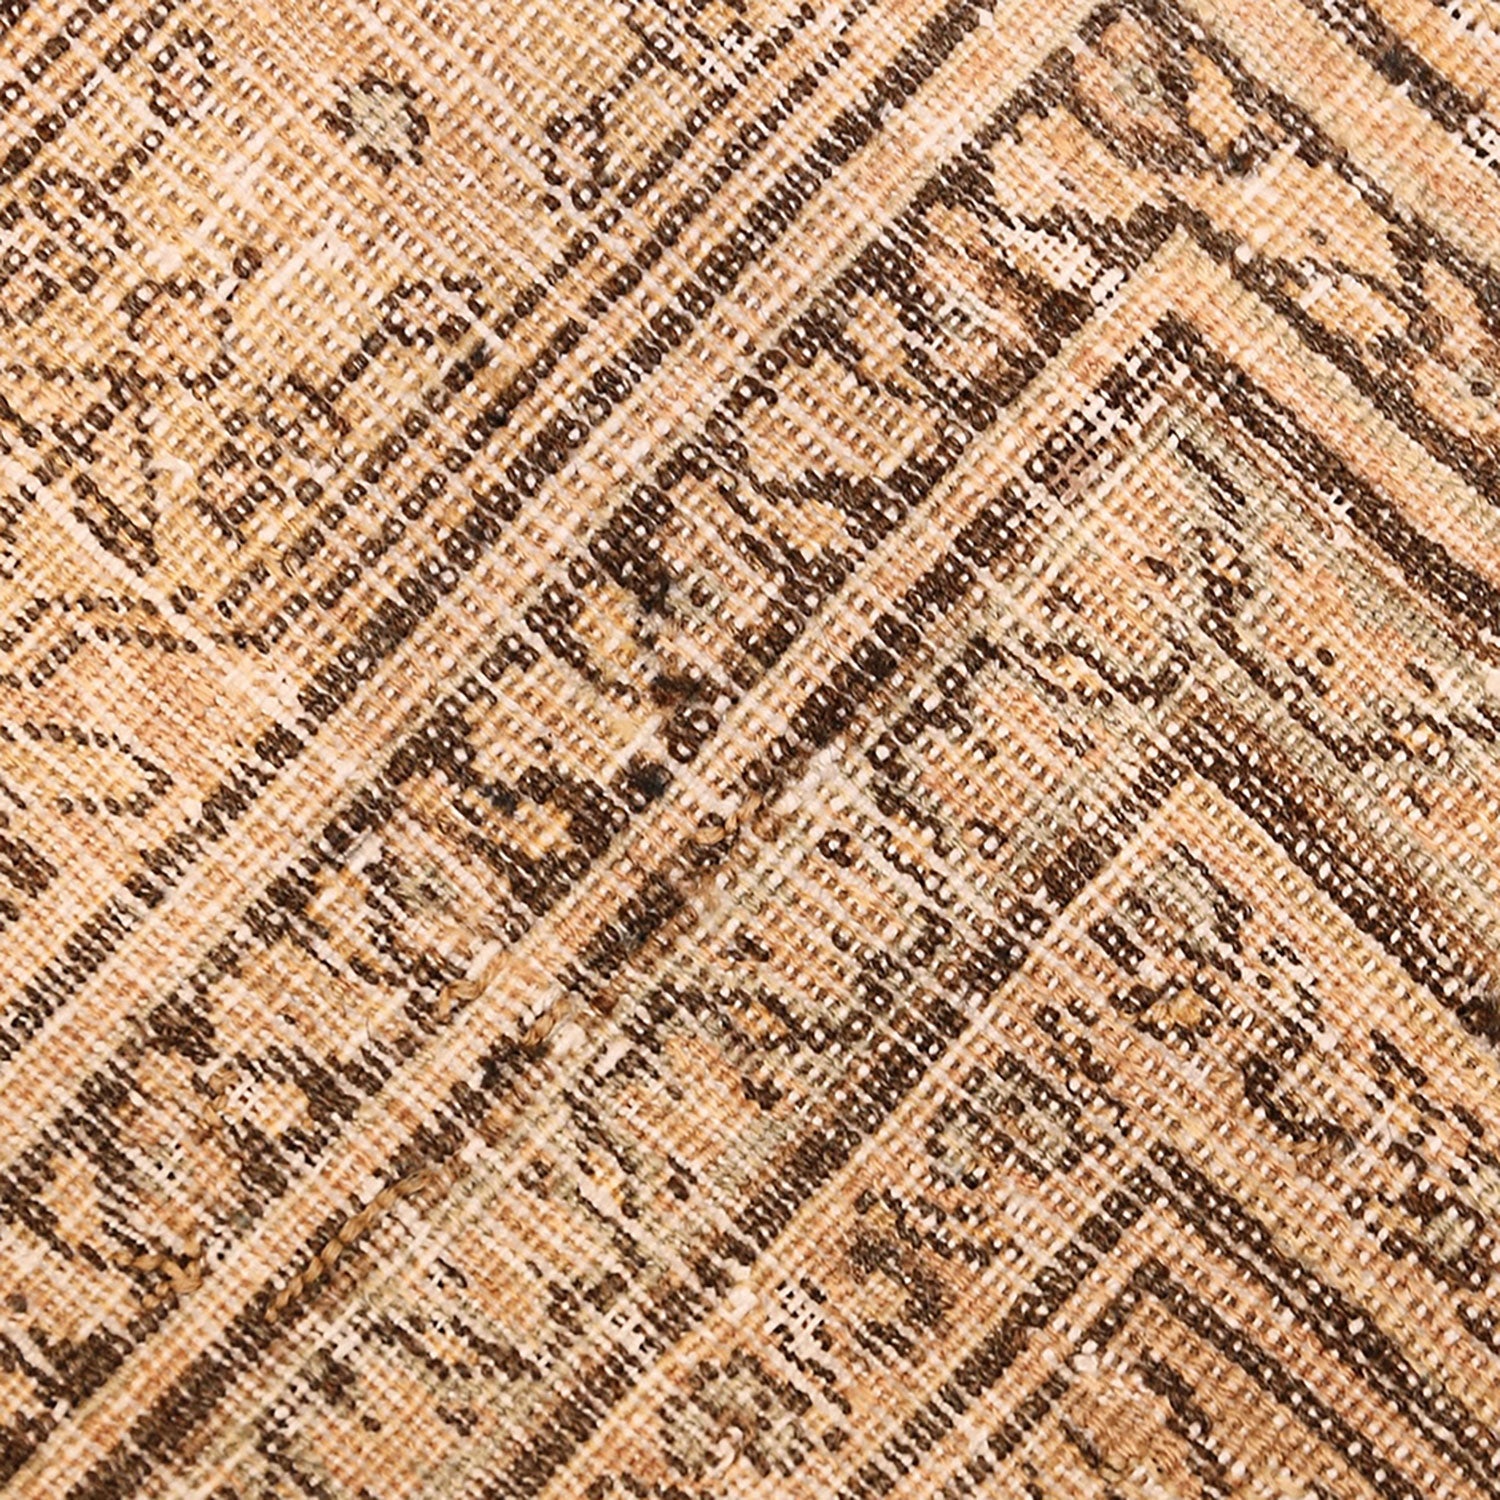 Close-up view of textured fabric with geometric pattern in beige, brown, and cream shades, featuring diagonal lines and horizontal bands creating diamond or zigzag shapes.